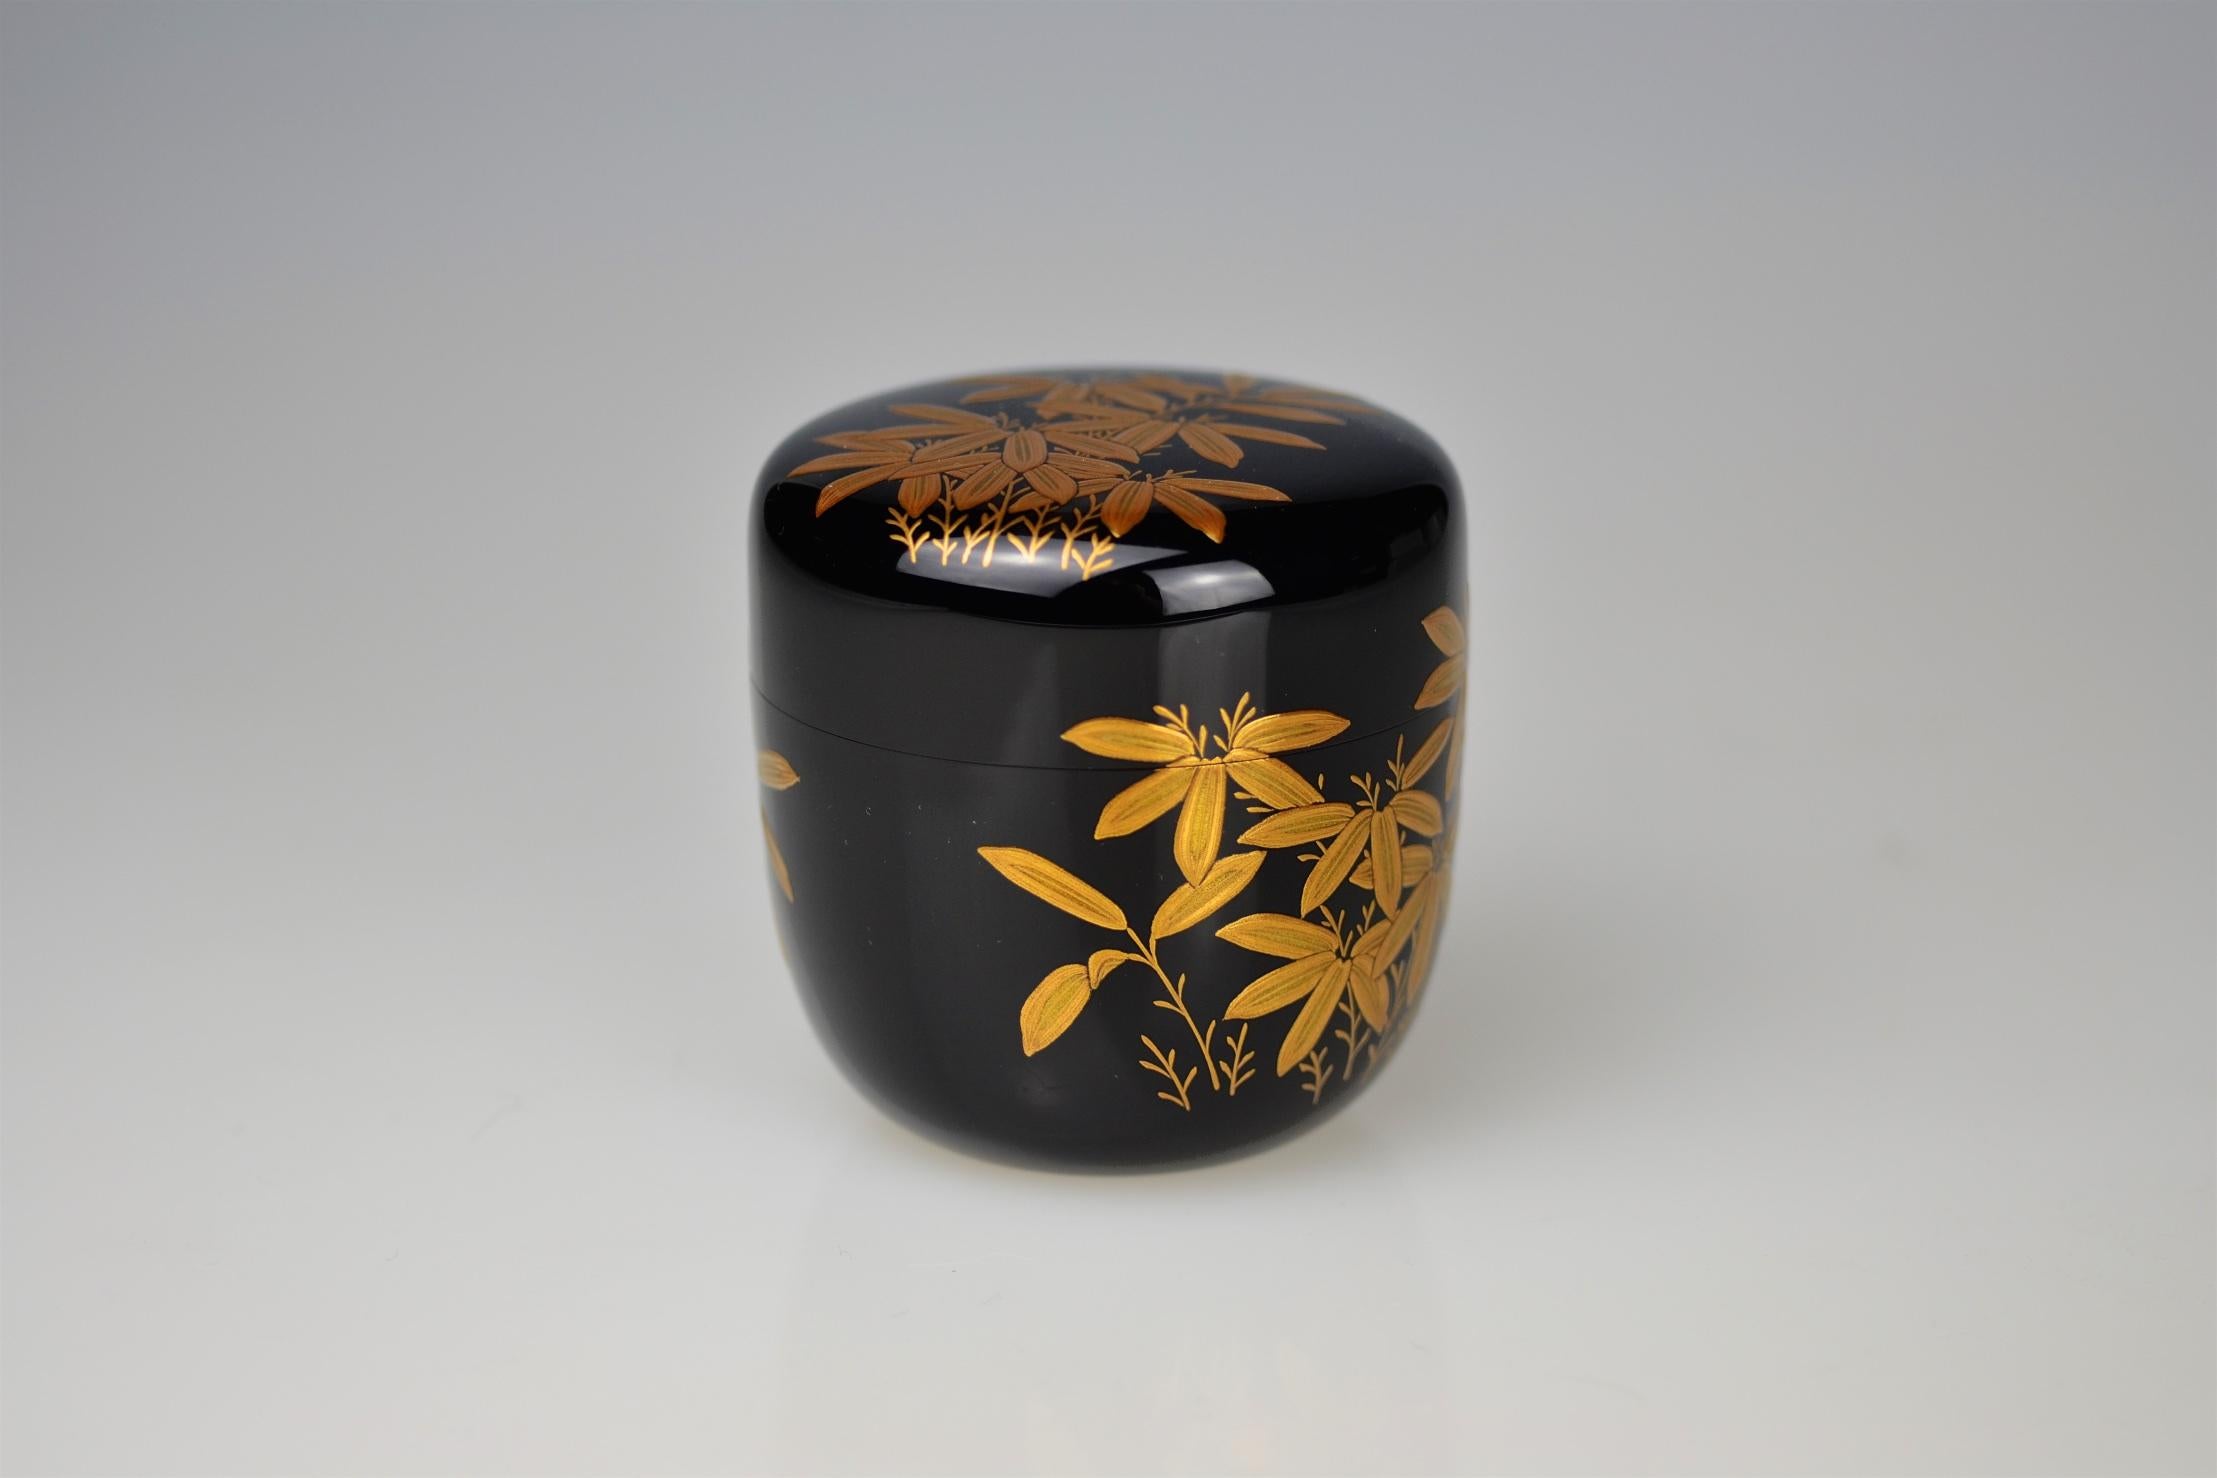 Excellent tea caddy (natsume) made by the 7th Ippyôsai, Ippyô Eizô (*1942). The exterior is finished in polished jet black lacquer (roiro) and decorated in gold maki-e with branches of bamboo grass (sasa). Interior and base in sprinkled gold